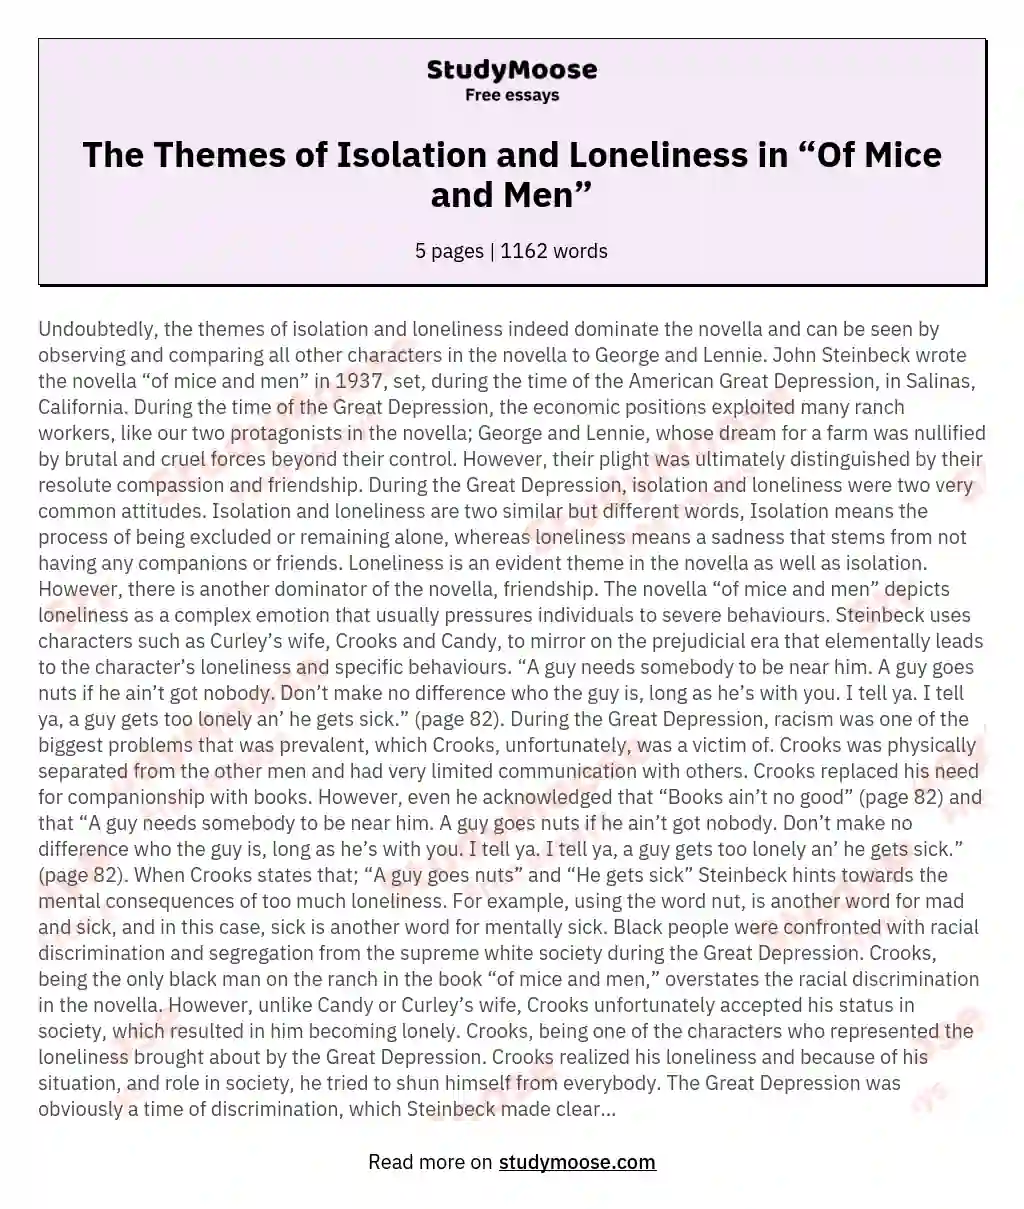 The Themes of Isolation and Loneliness in “Of Mice and Men”